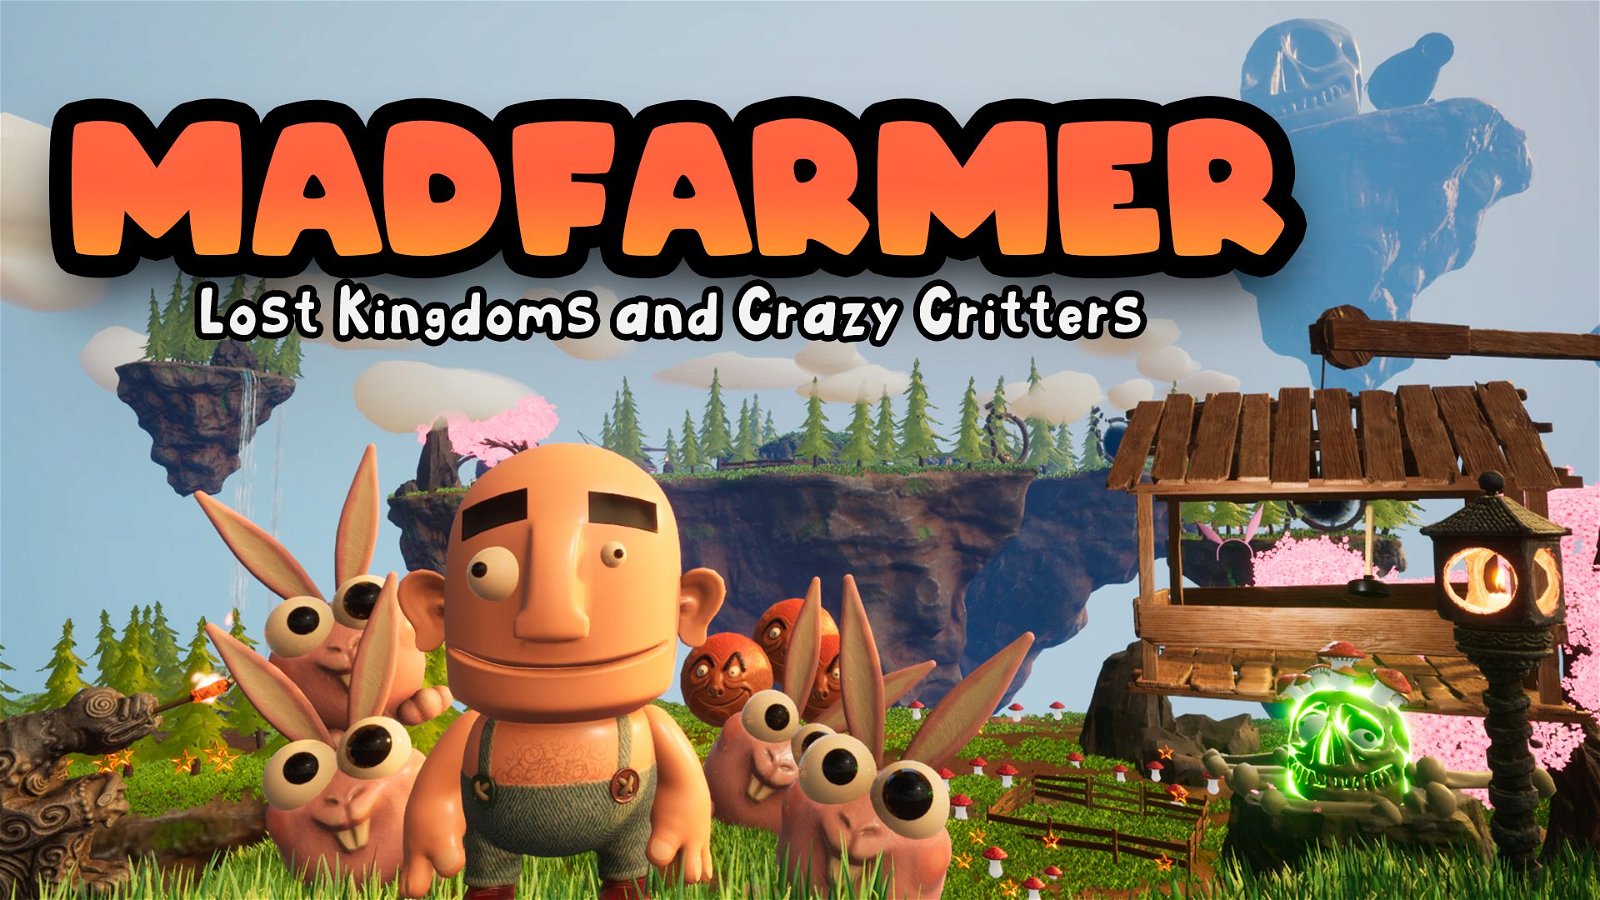 Image of Madfarmer: Lost Kingdoms and Crazy Critters